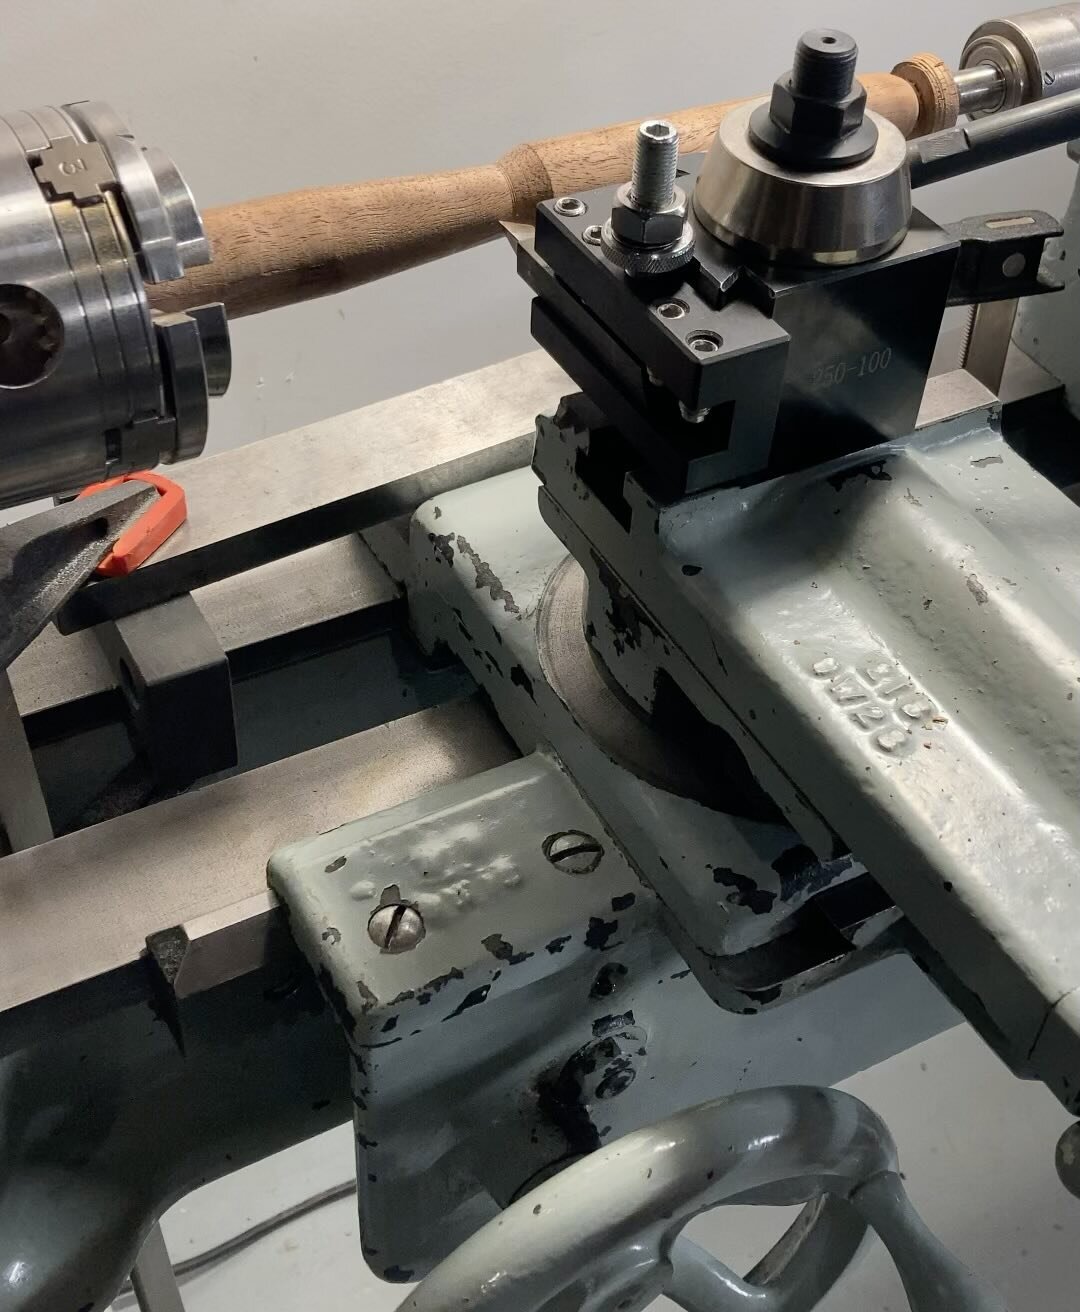 Lathe duplicator prototype. I absolutely love turning by hand, but I really don&rsquo;t like production work. So I&rsquo;m working on adapting my lathe carriage to trace a template so I can churn out a lot of uniform pieces or reproduce a turned piec